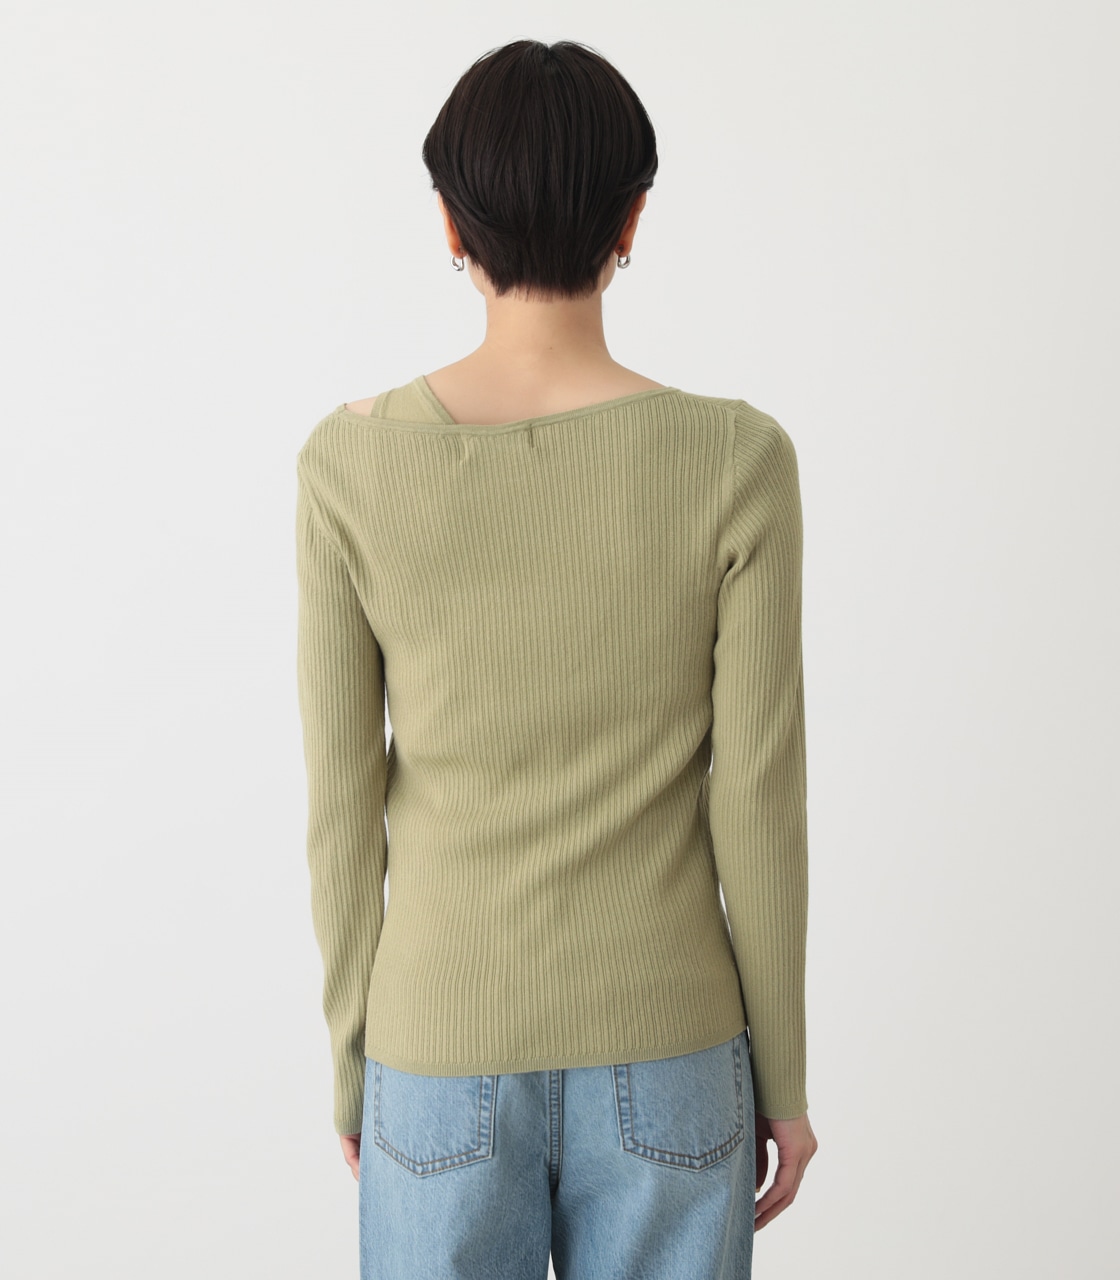 FAKE LAYERED BUTTON KNIT TOPS/フェイクレイヤードボタンニットトップス 詳細画像 LIME 7